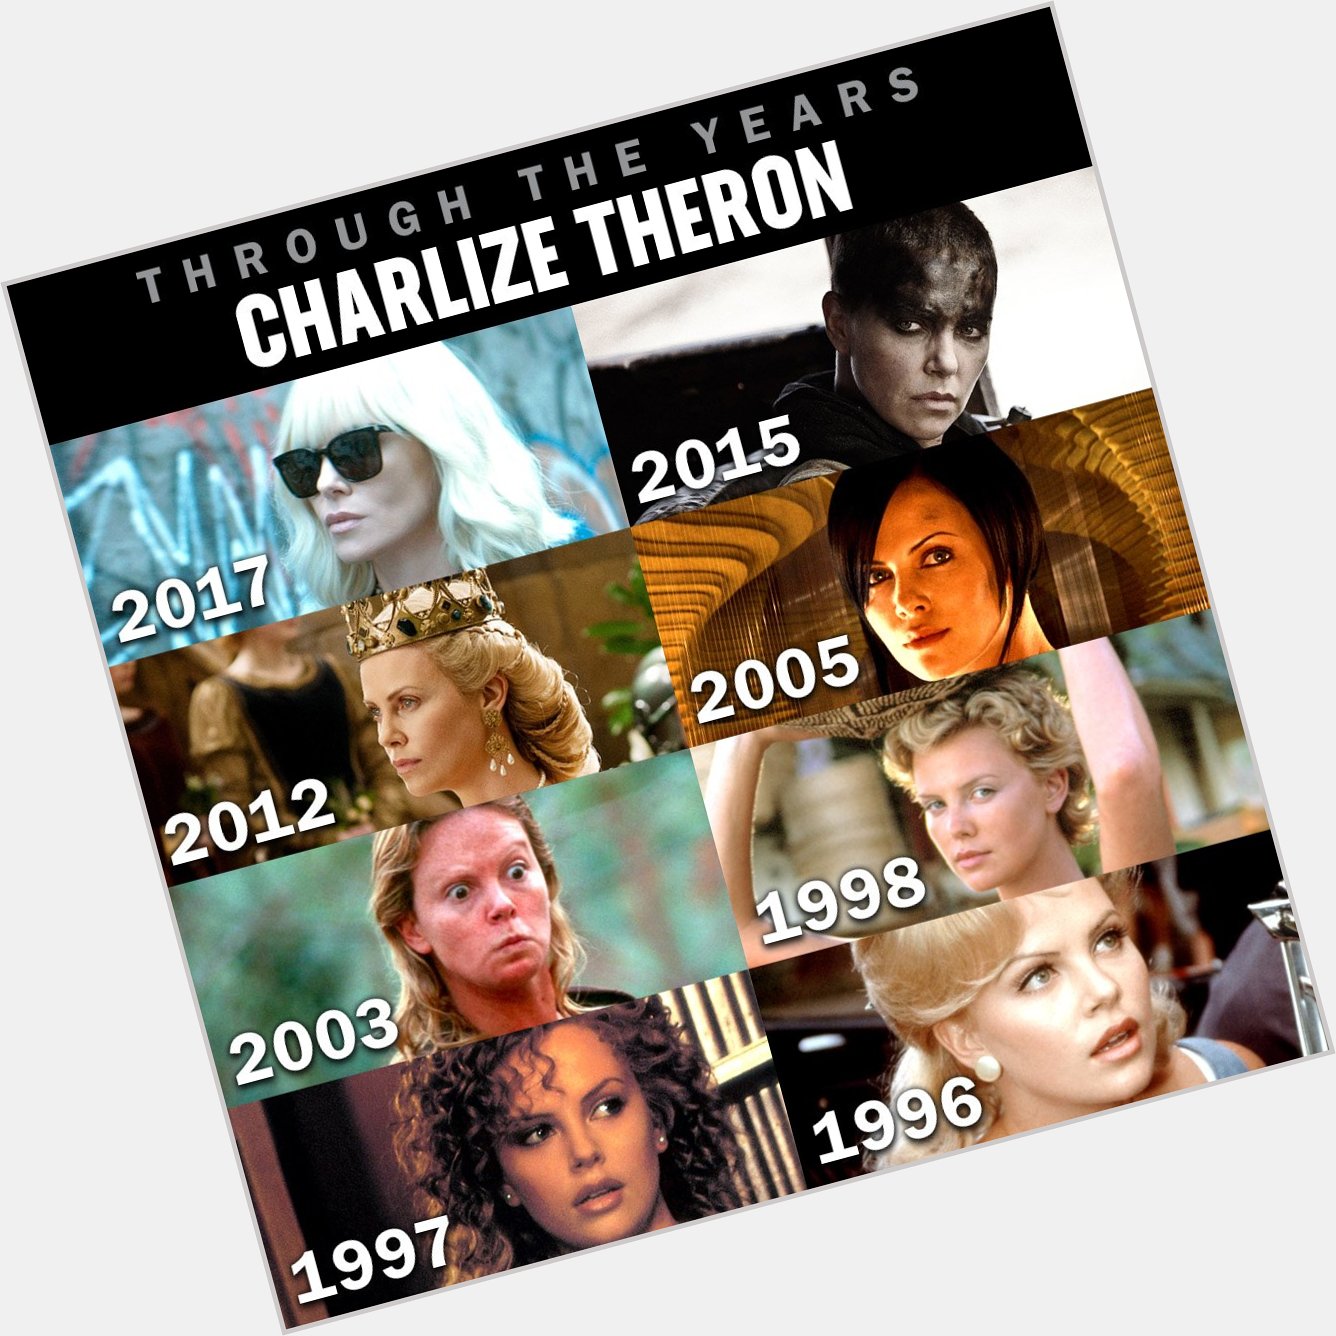 Happy birthday Charlize Theron! Which of her roles is your favorite? 